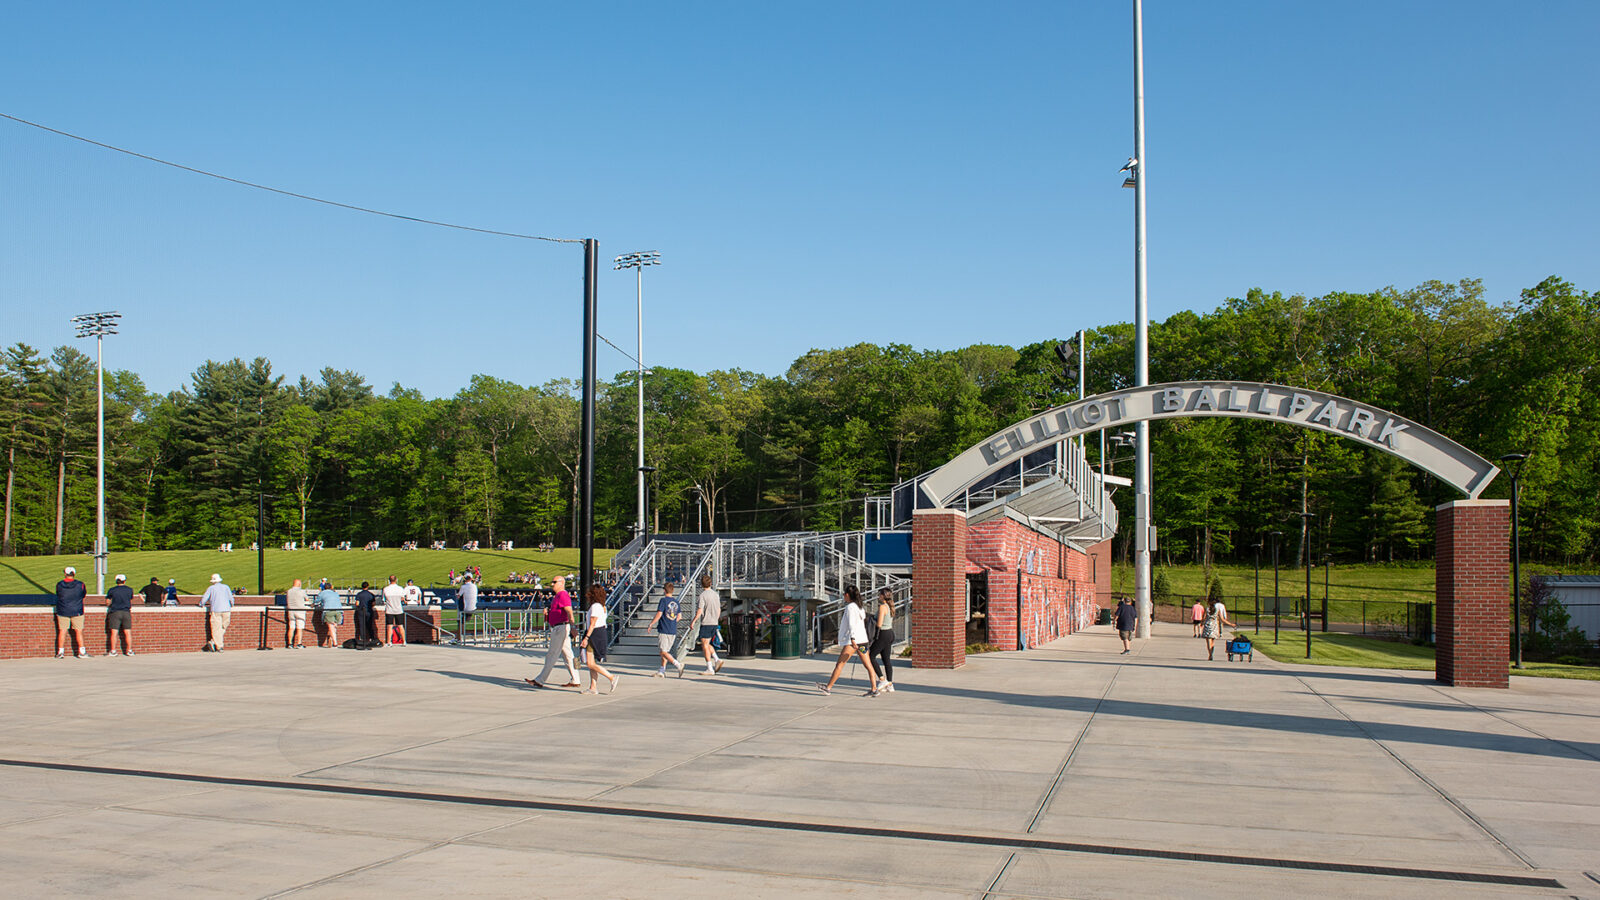 A group of people standing in front of the Husky Athletic Village baseball field.